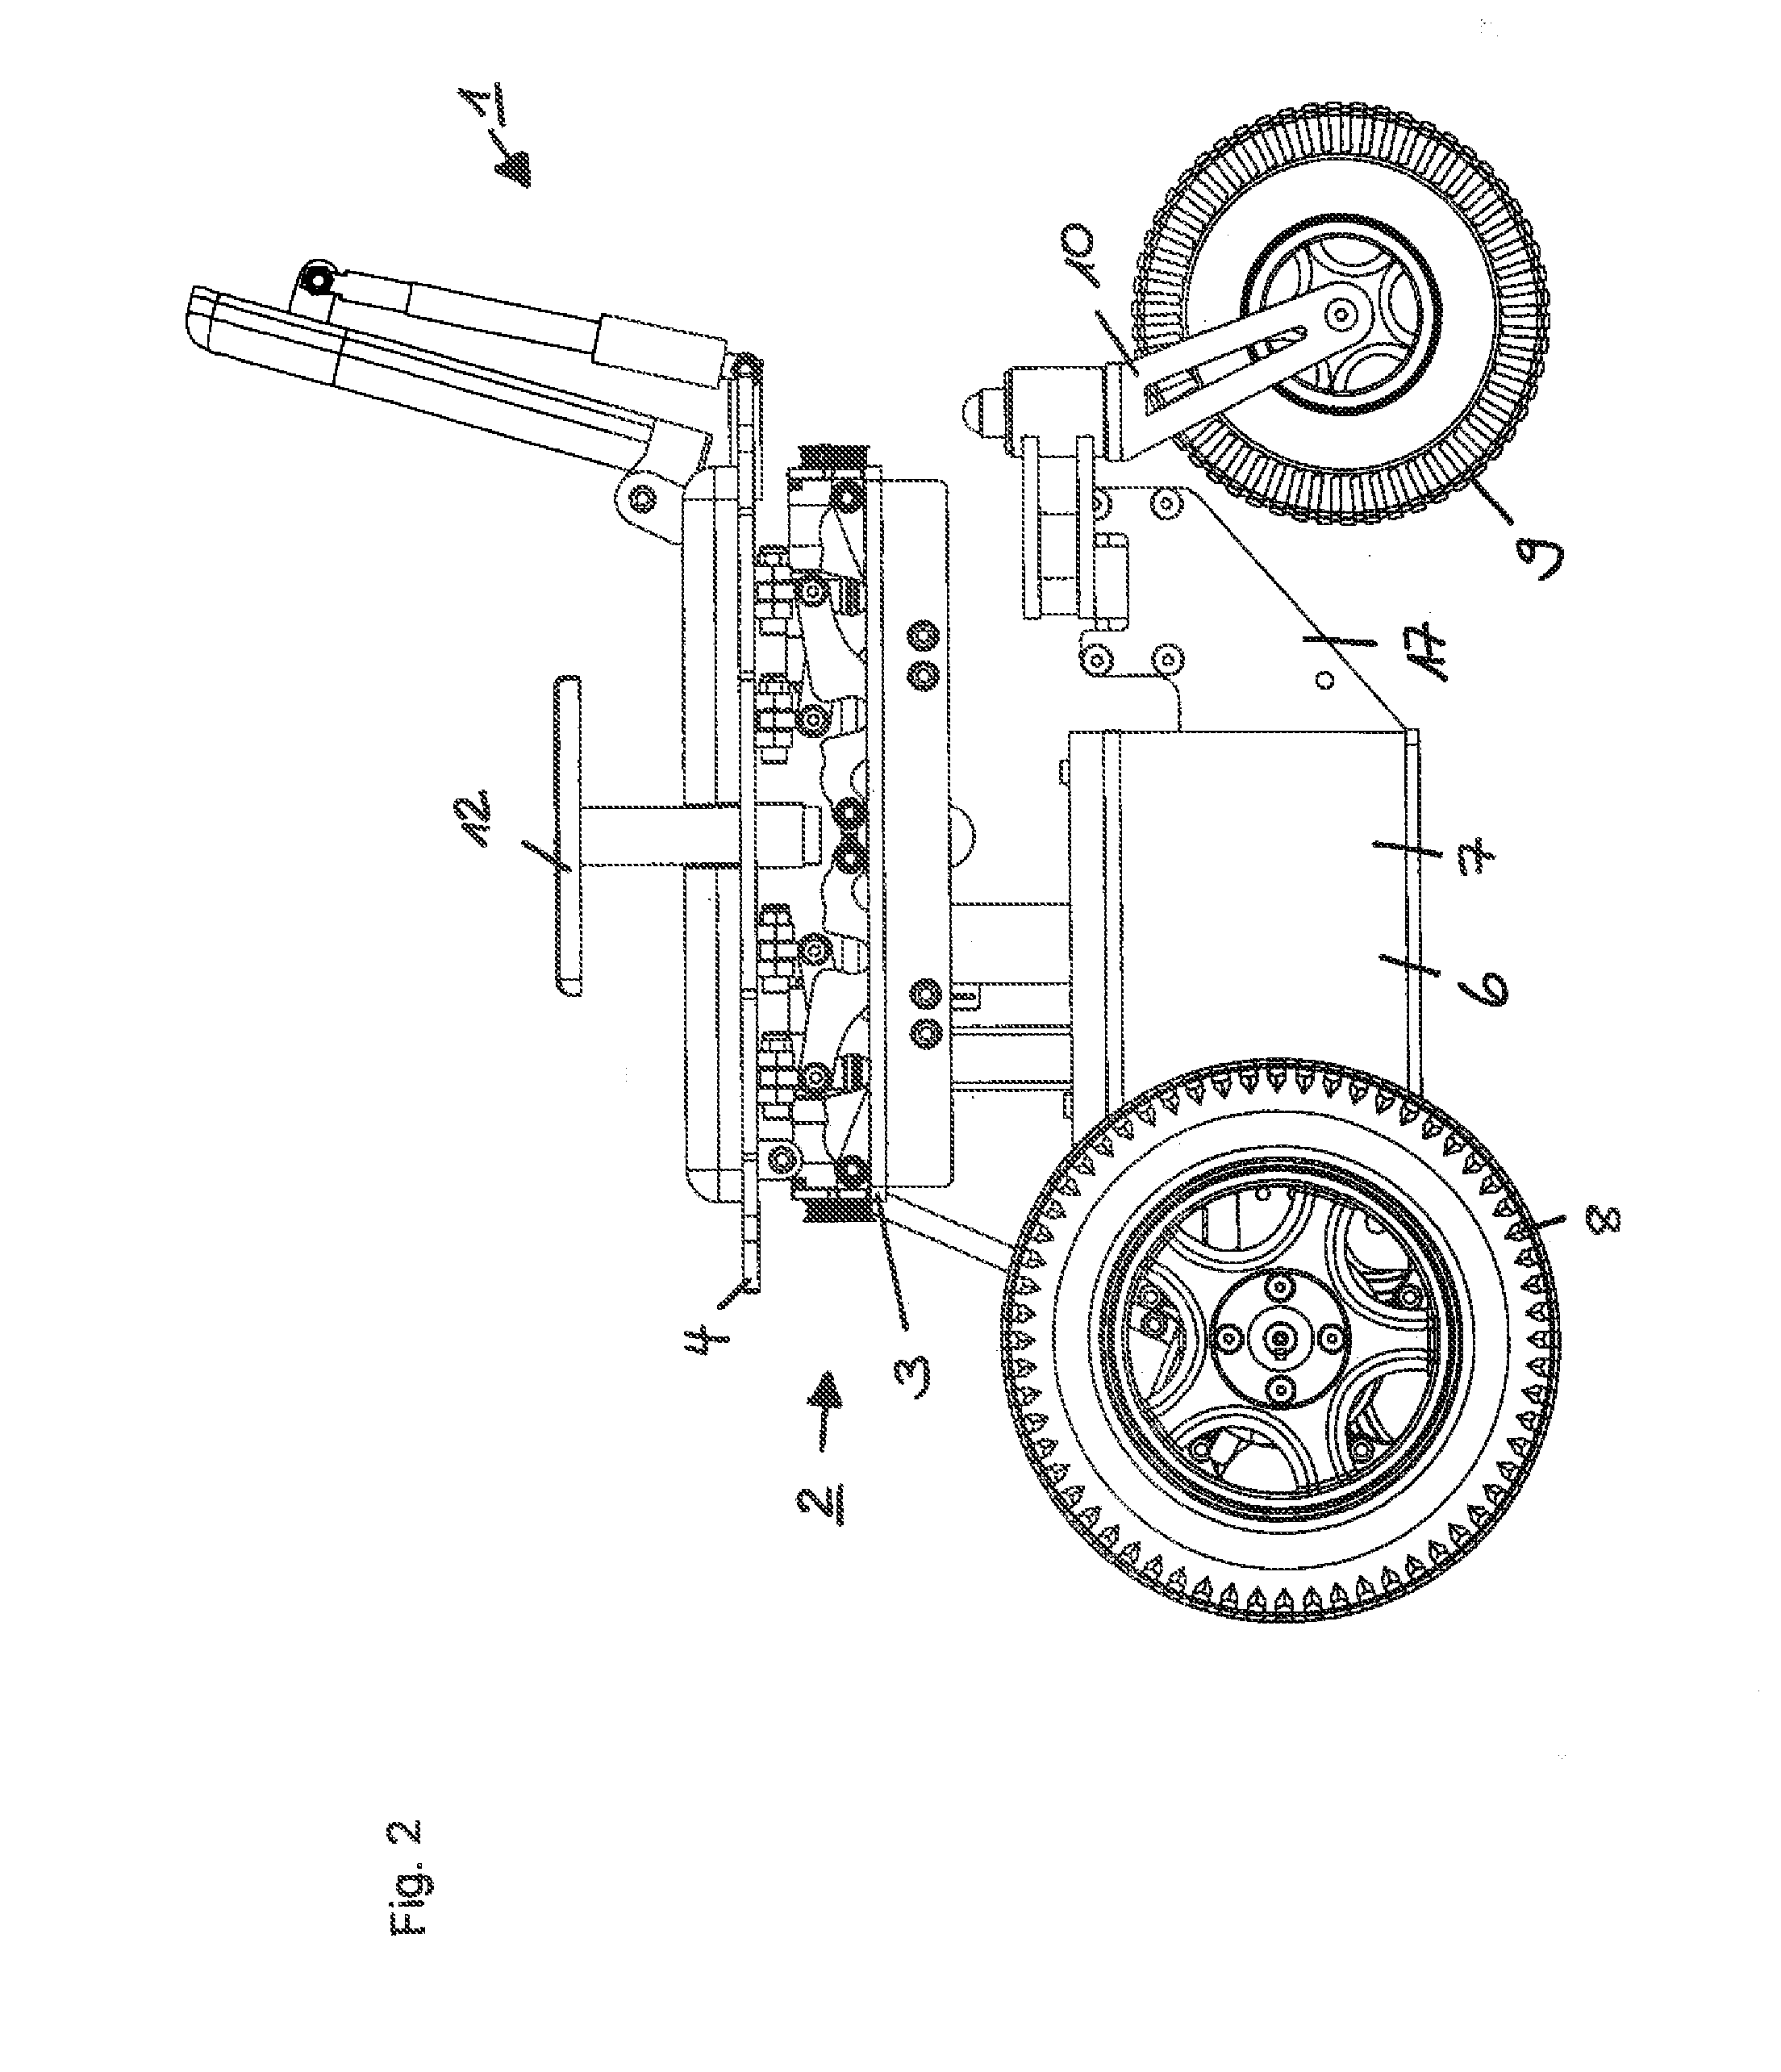 Adjustment Device for Vehicle Seats